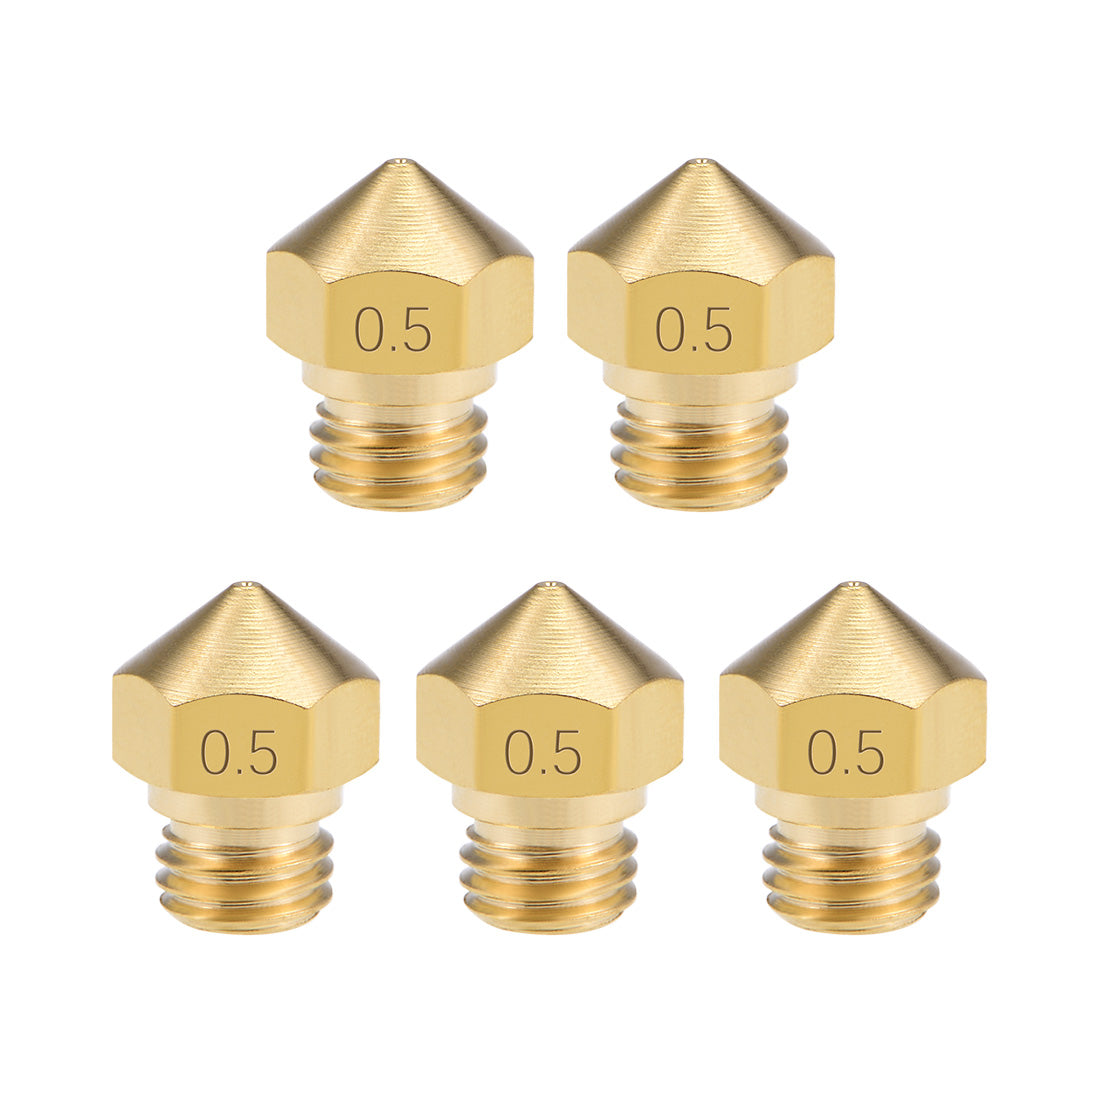 uxcell Uxcell 0.5mm 3D Printer Nozzle Head M7 for MK10 1.75mm Extruder Print, Brass 5pcs